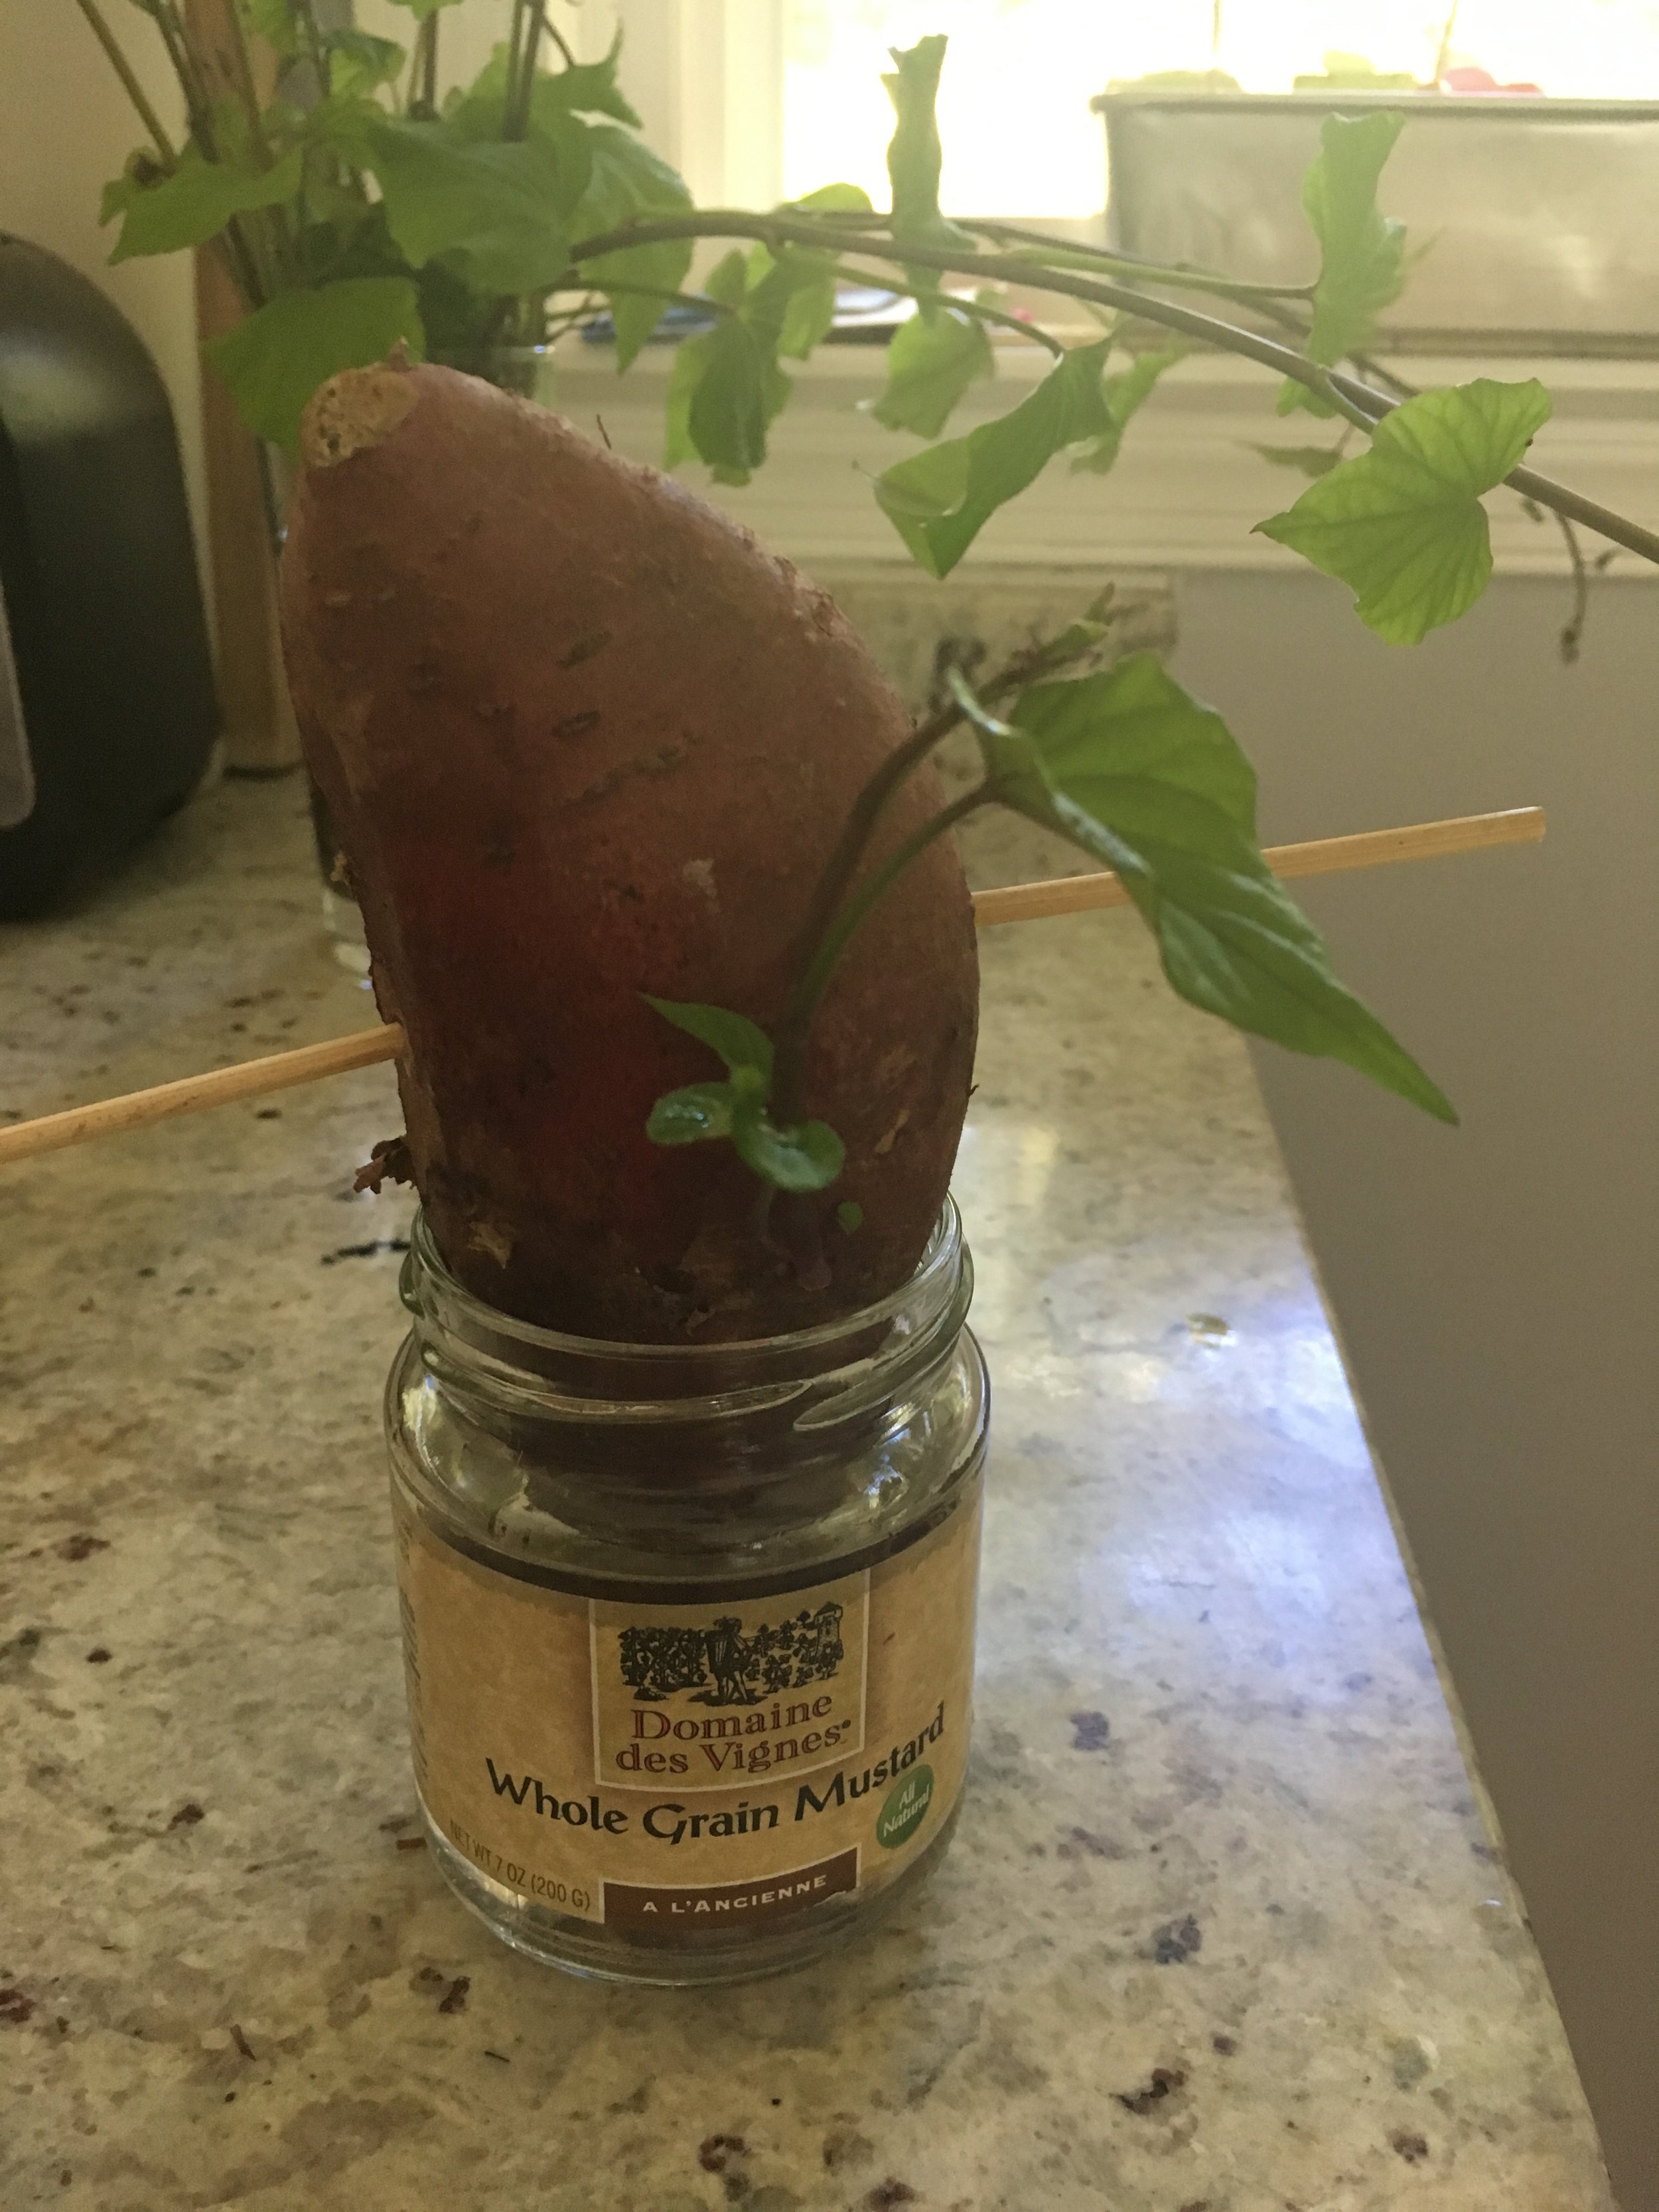 How To Sprout And Plant Sweet Potato Vines Experiments As A Kitchen Counter Sweet Potato Farmer Sojourner Williams Yoga,Medium Rare Steak Images